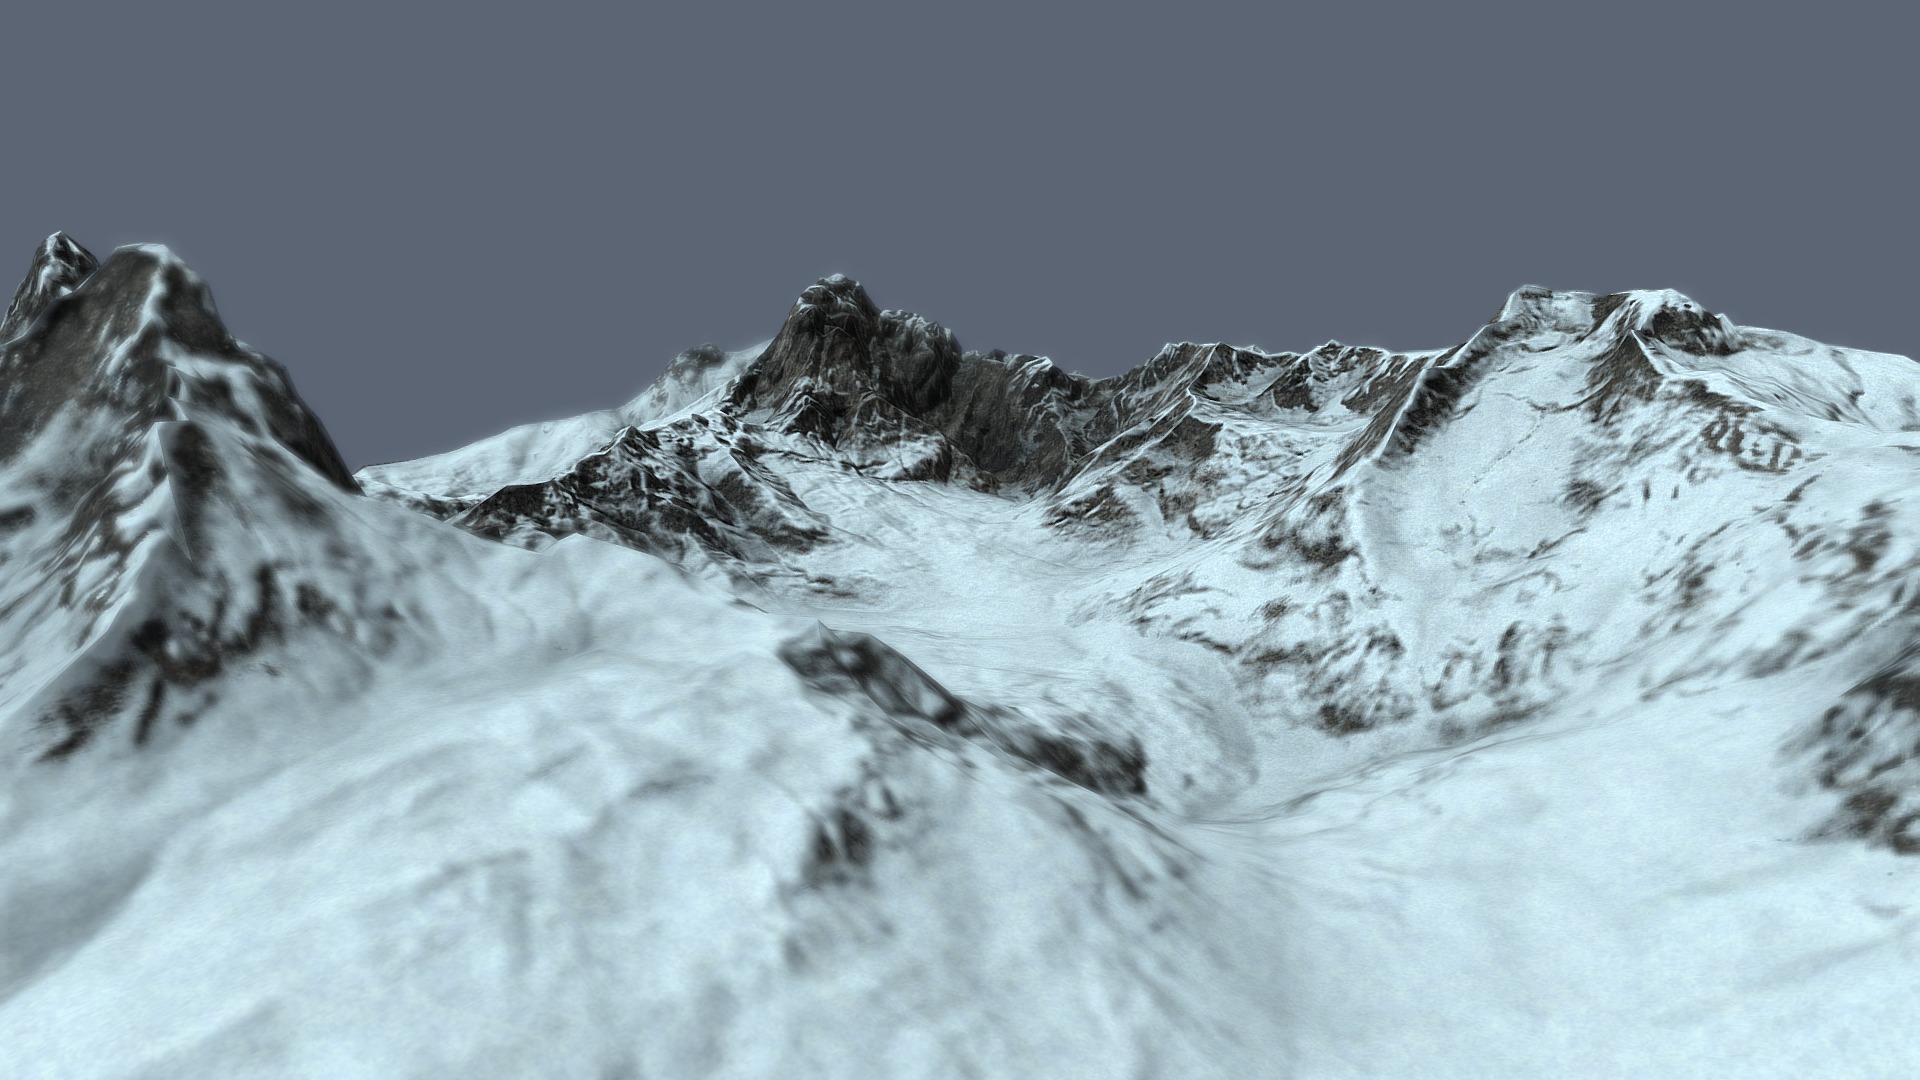 3D model Snowy Mountain Peaks And Valleys - This is a 3D model of the Snowy Mountain Peaks And Valleys. The 3D model is about a snowy mountain range.